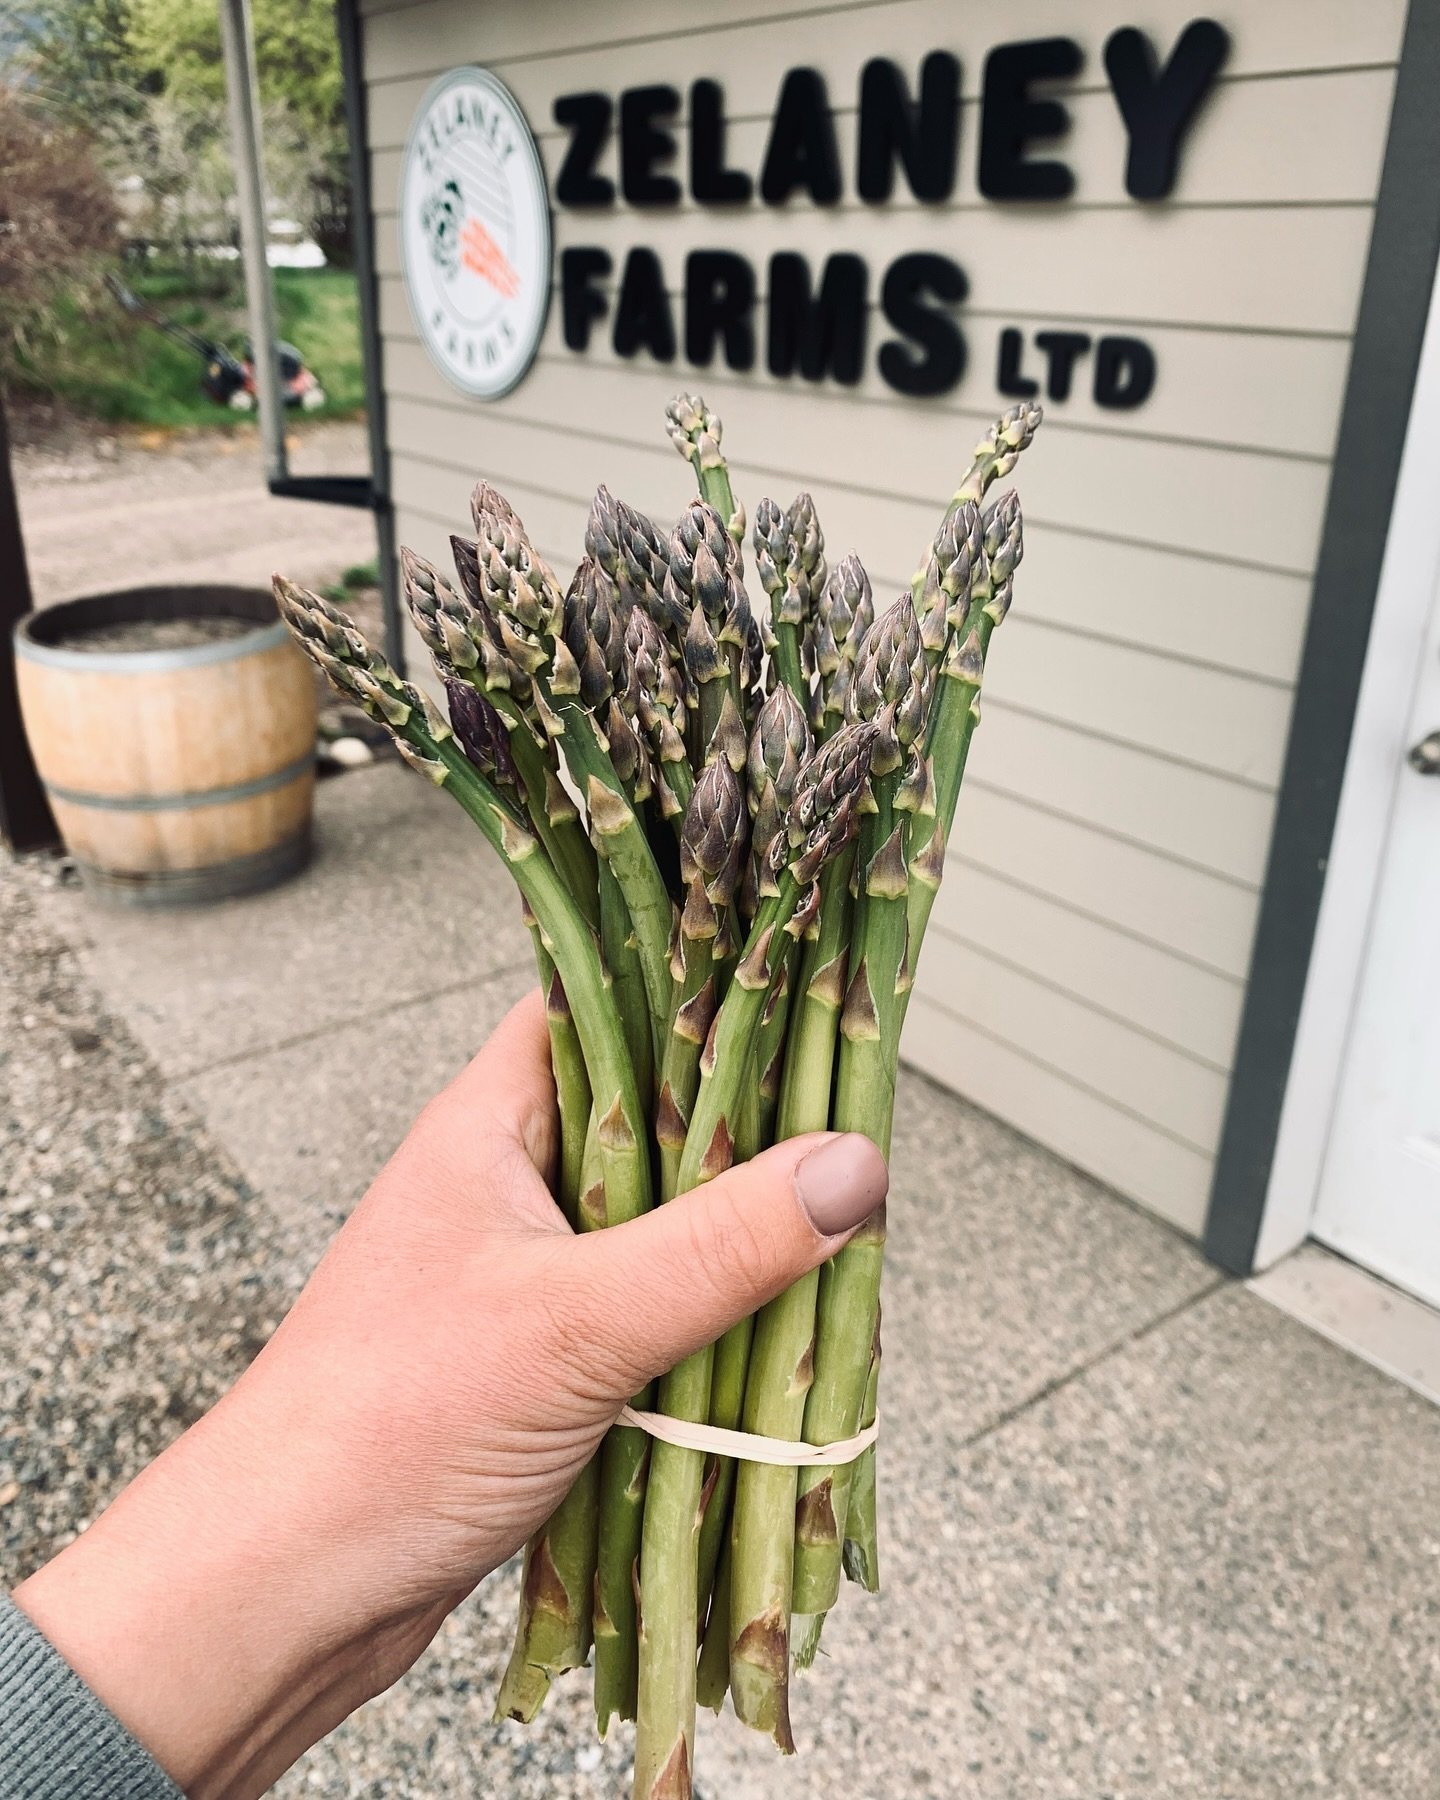 Now available at our Farm Shoppe in Lavington!
Fresh Asparagus grown by our friends at @sparrowgrassfieldandflower in Armstrong. 

OPEN now Monday to Saturday 9am-5pm
5481 Petworth Rd in Lavington